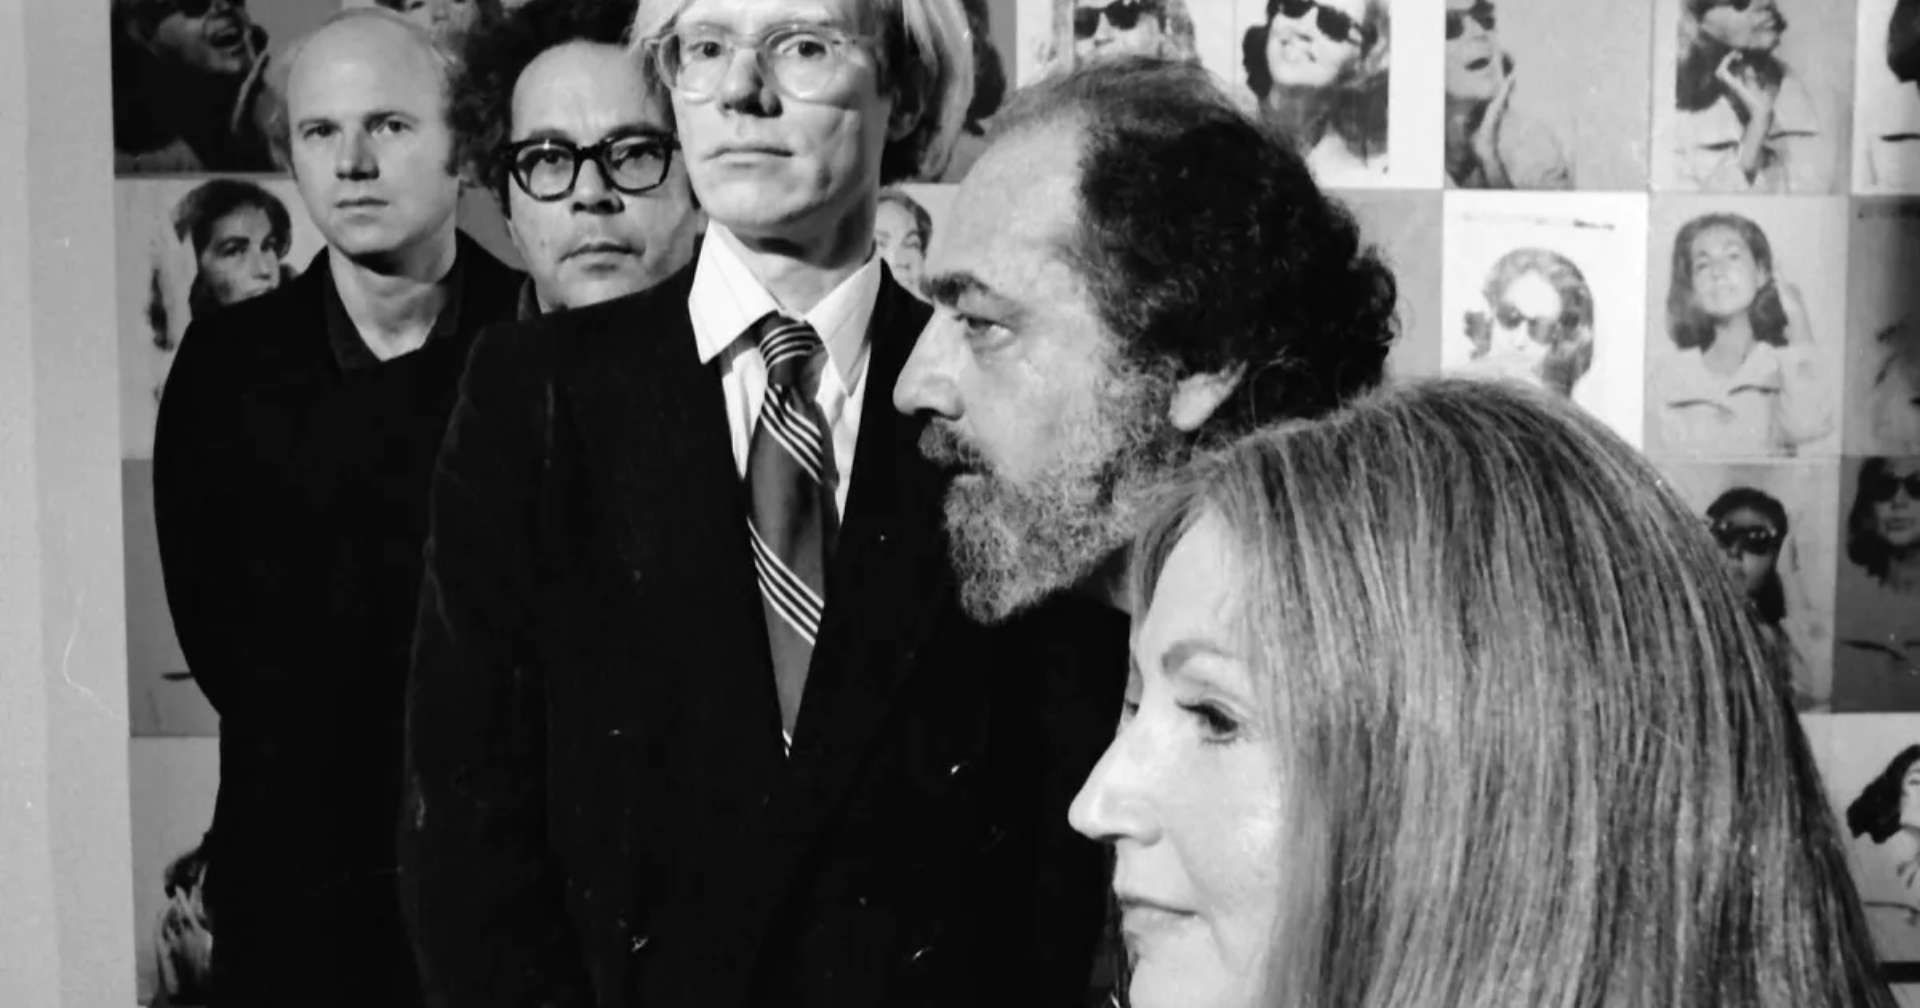 Image © Artsy / Collectors Ethel and Robert Scull with Andy Warhol, George Segal and James Rosenquist by Jack Mitchell - MyArtBroker